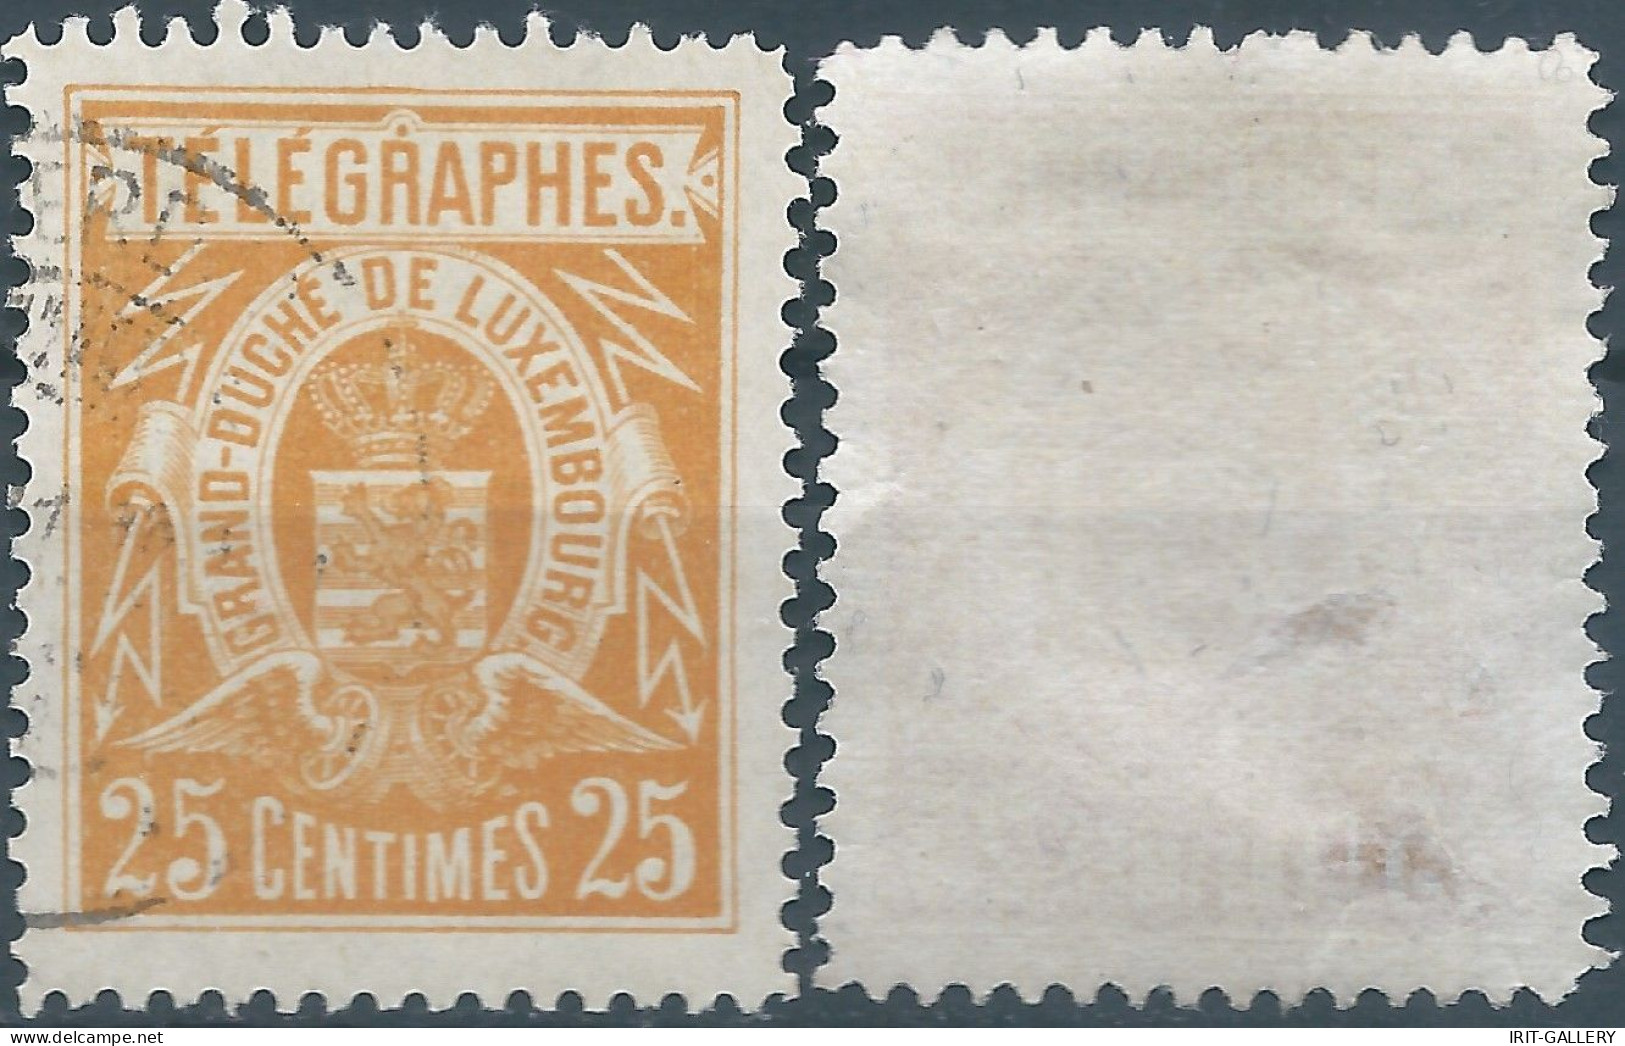 Lussemburgo - Luxembourg -TELEGRAPHES 1883 Telegraph Stamps,25C,Used & Not Cancelled, Mint - Telegrafi